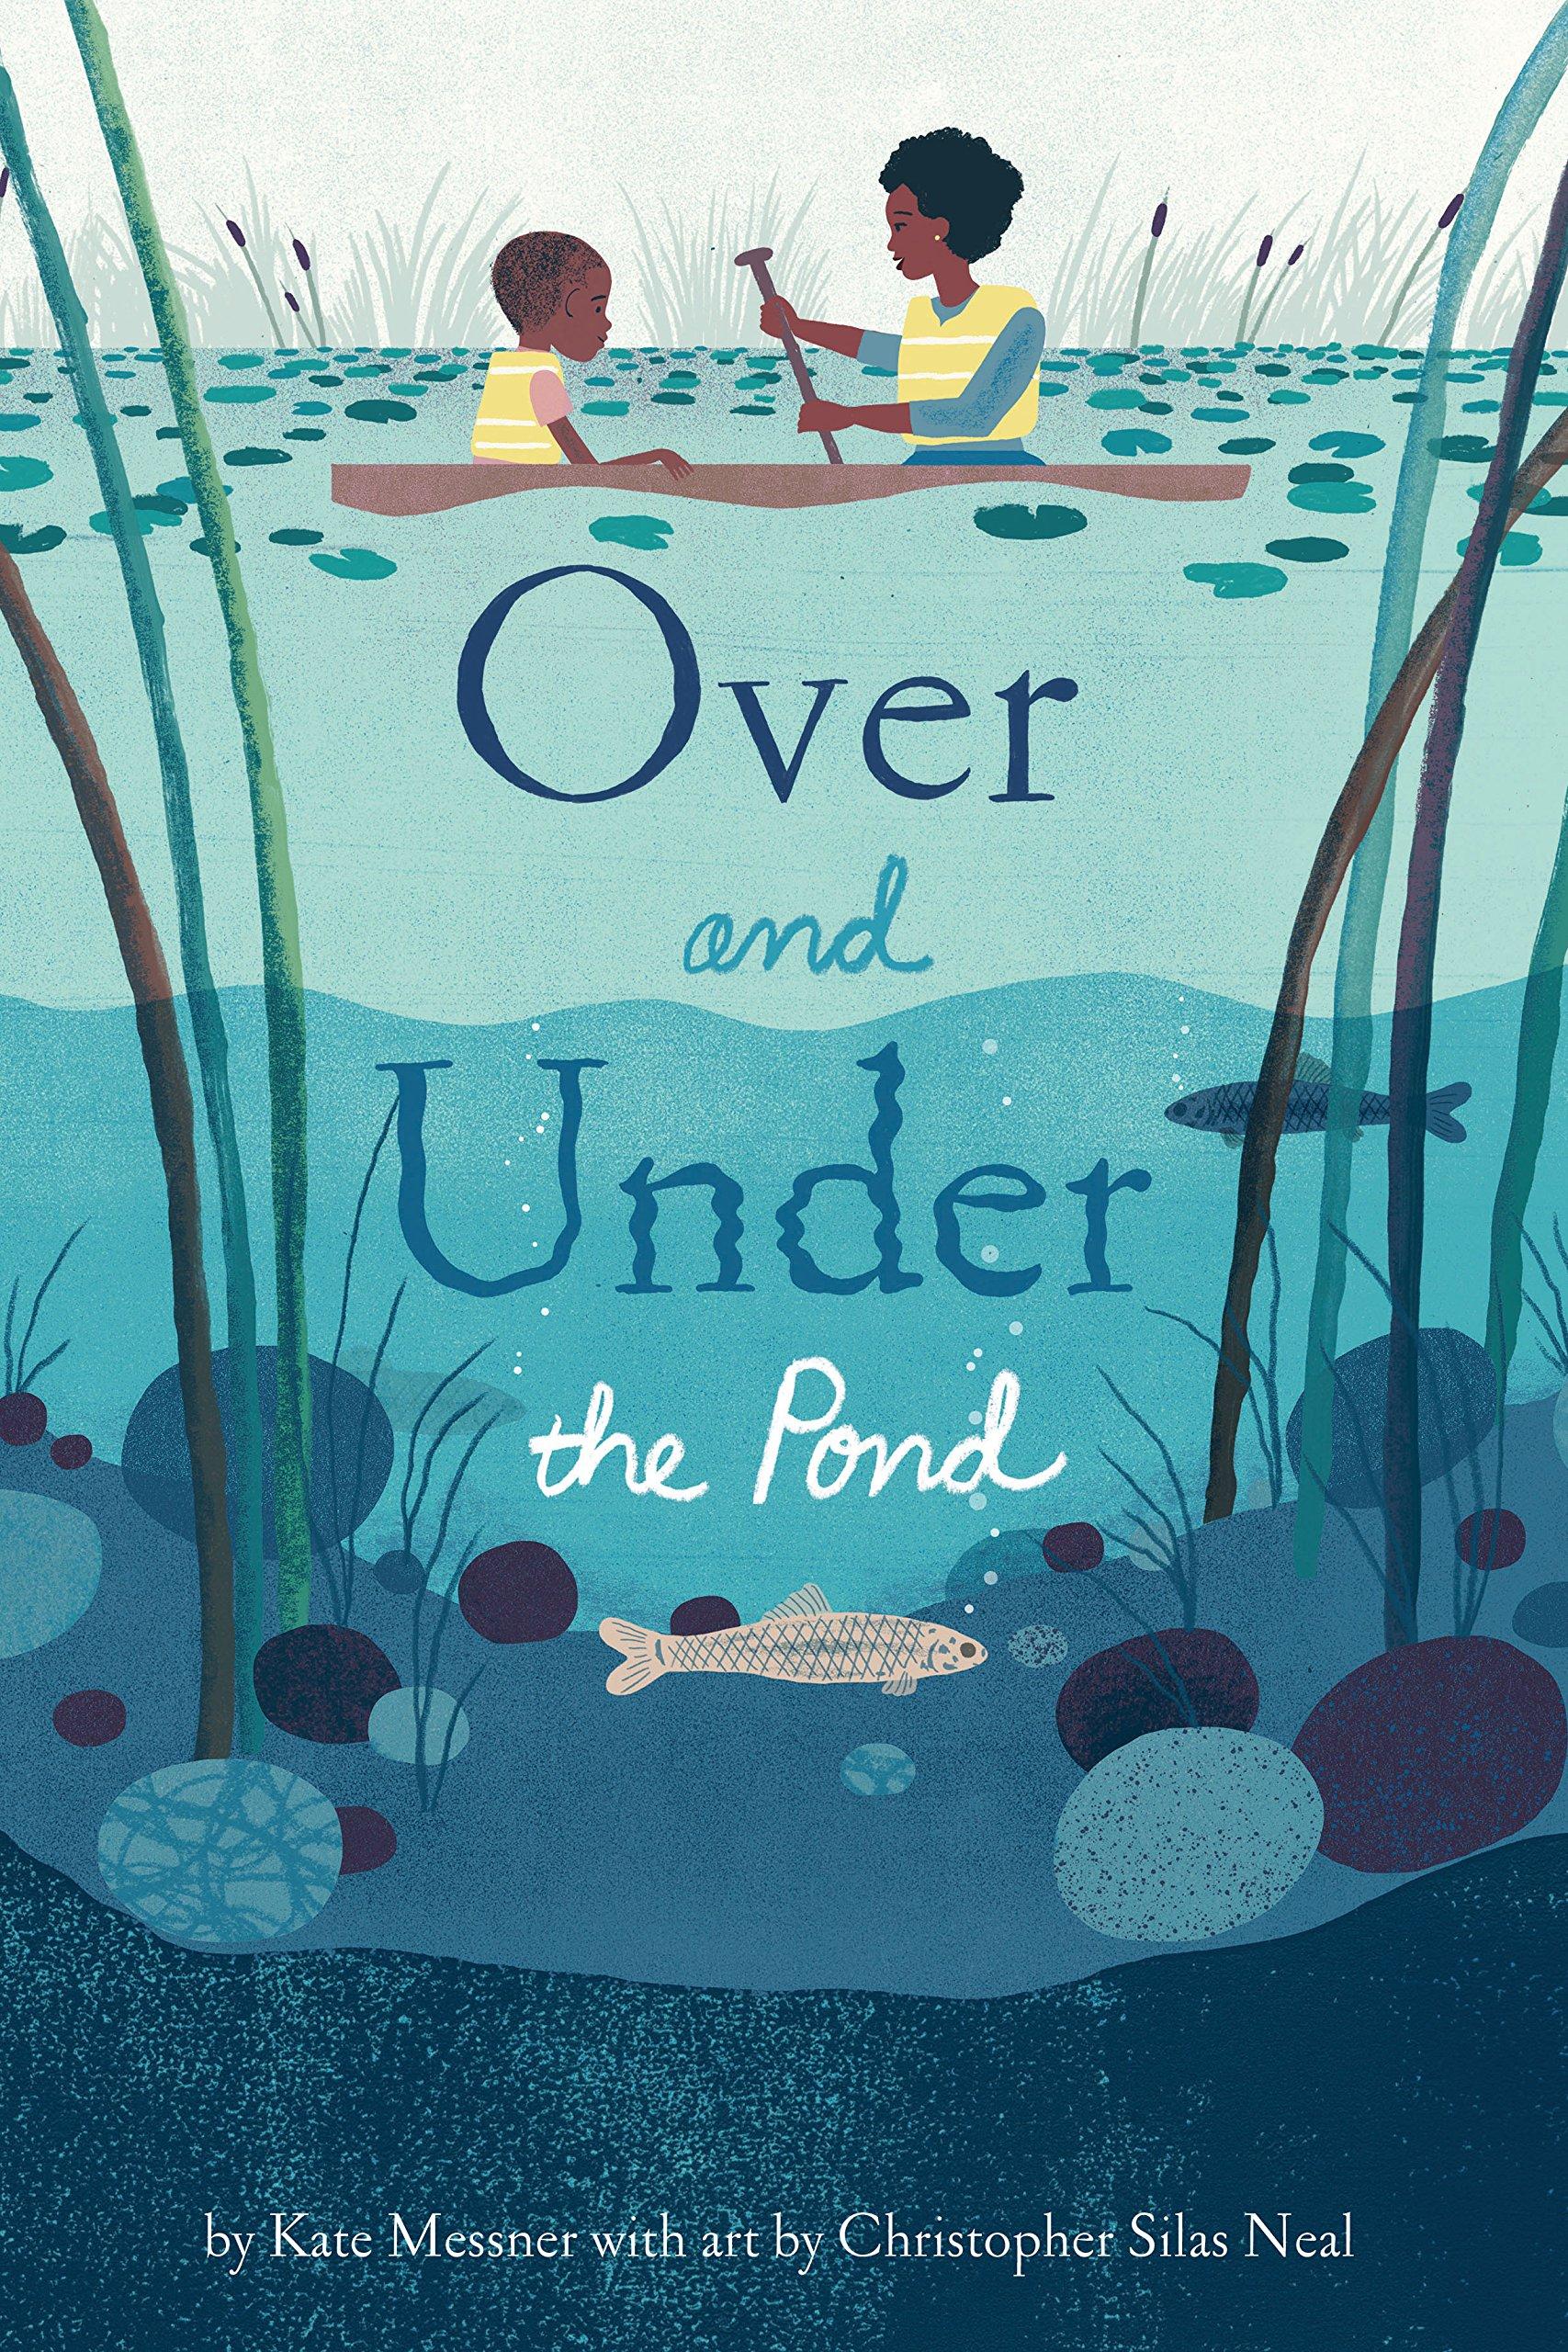 Image result for over and under the pond messner